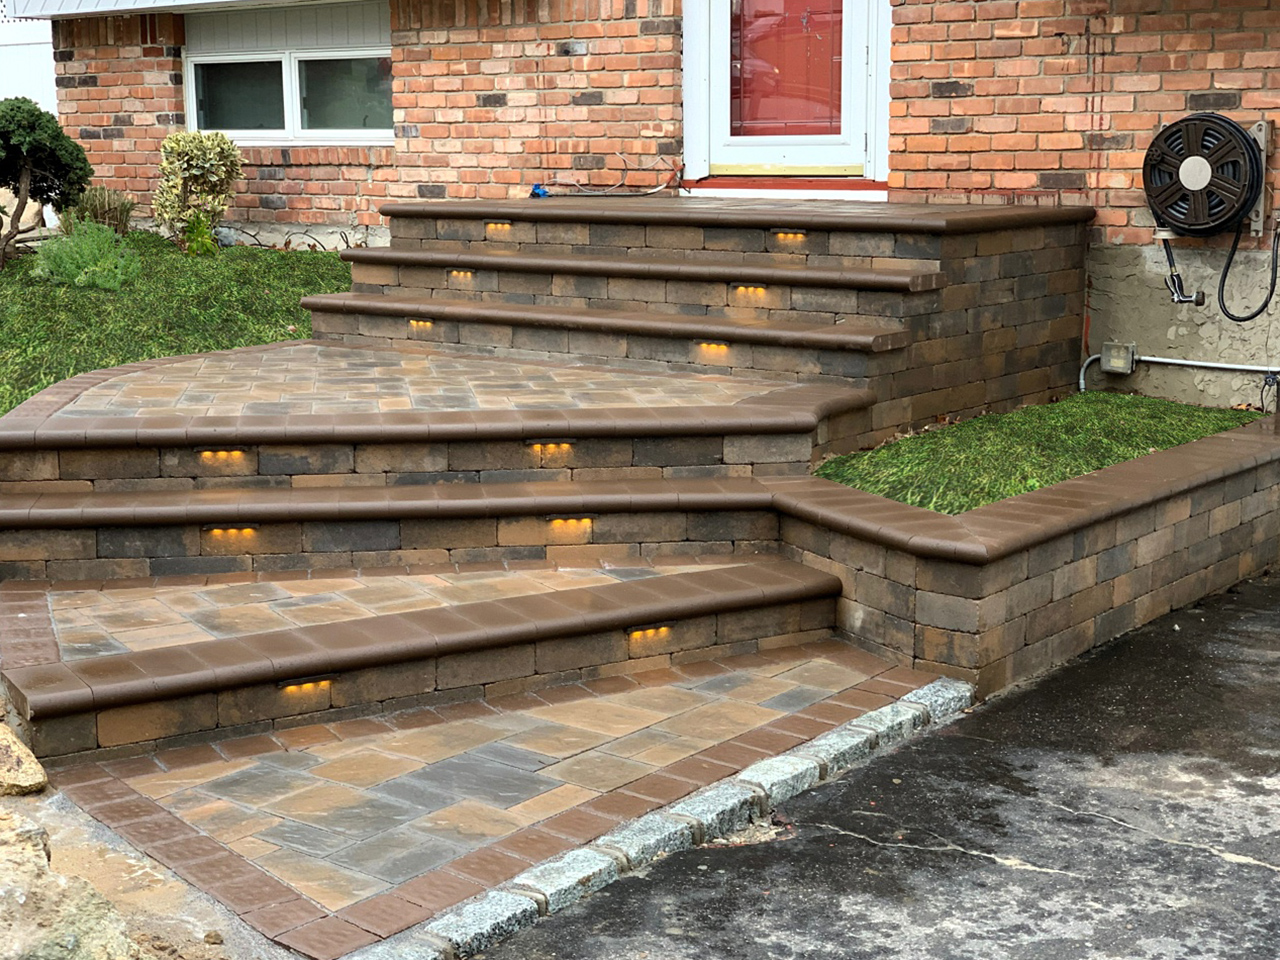 Natural stone steps that create a visually appealing focal point in the landscape design